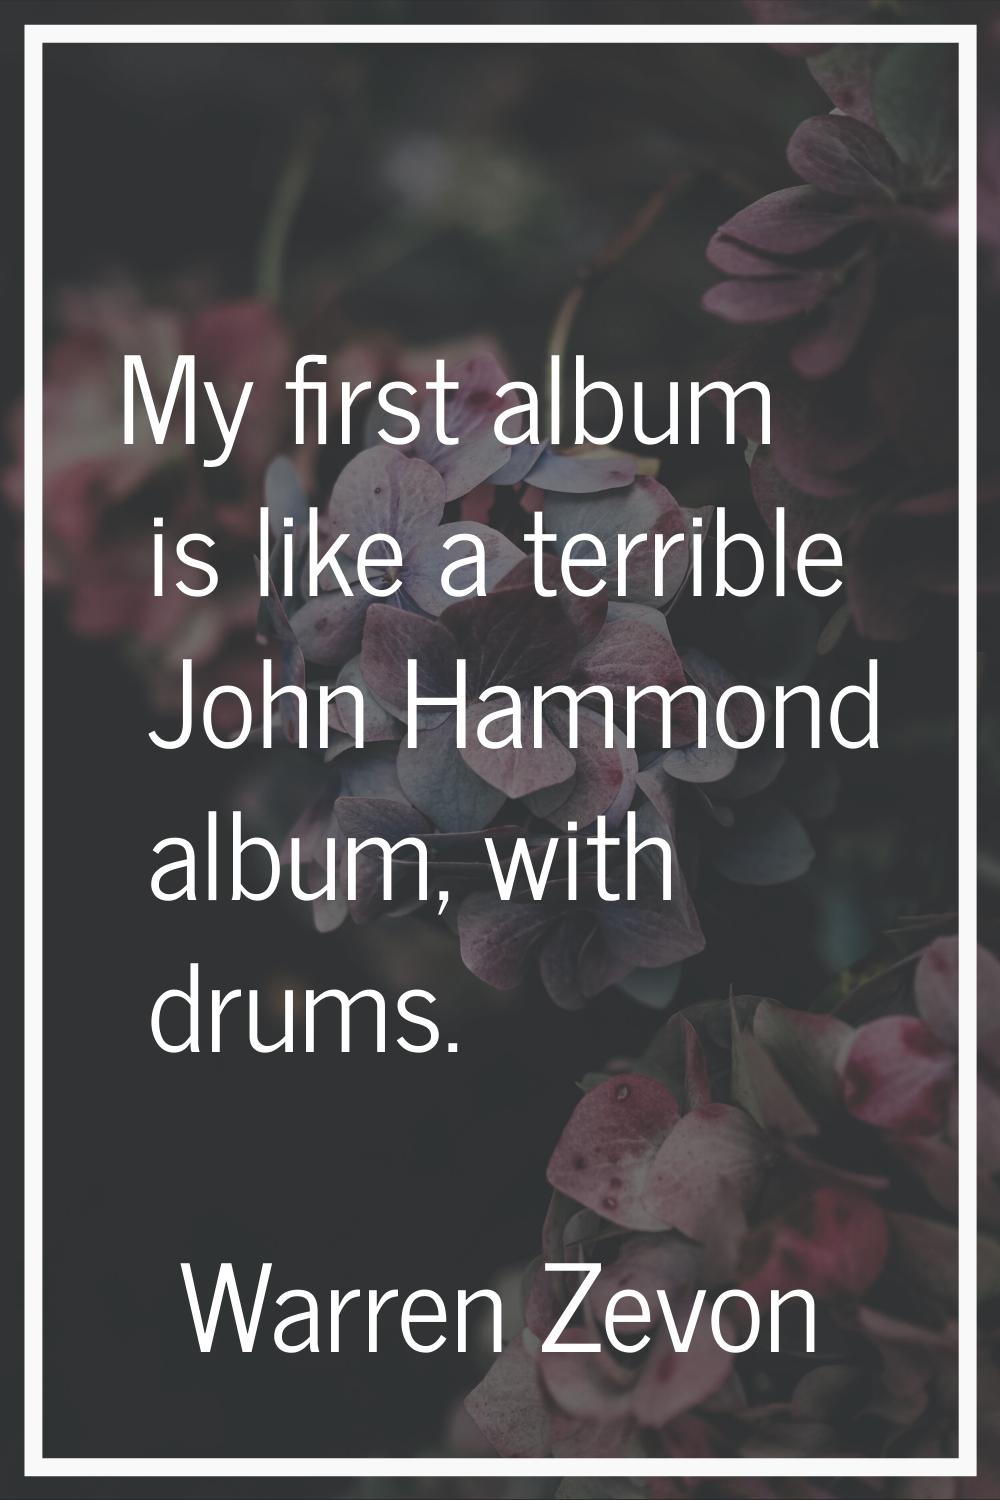 My first album is like a terrible John Hammond album, with drums.